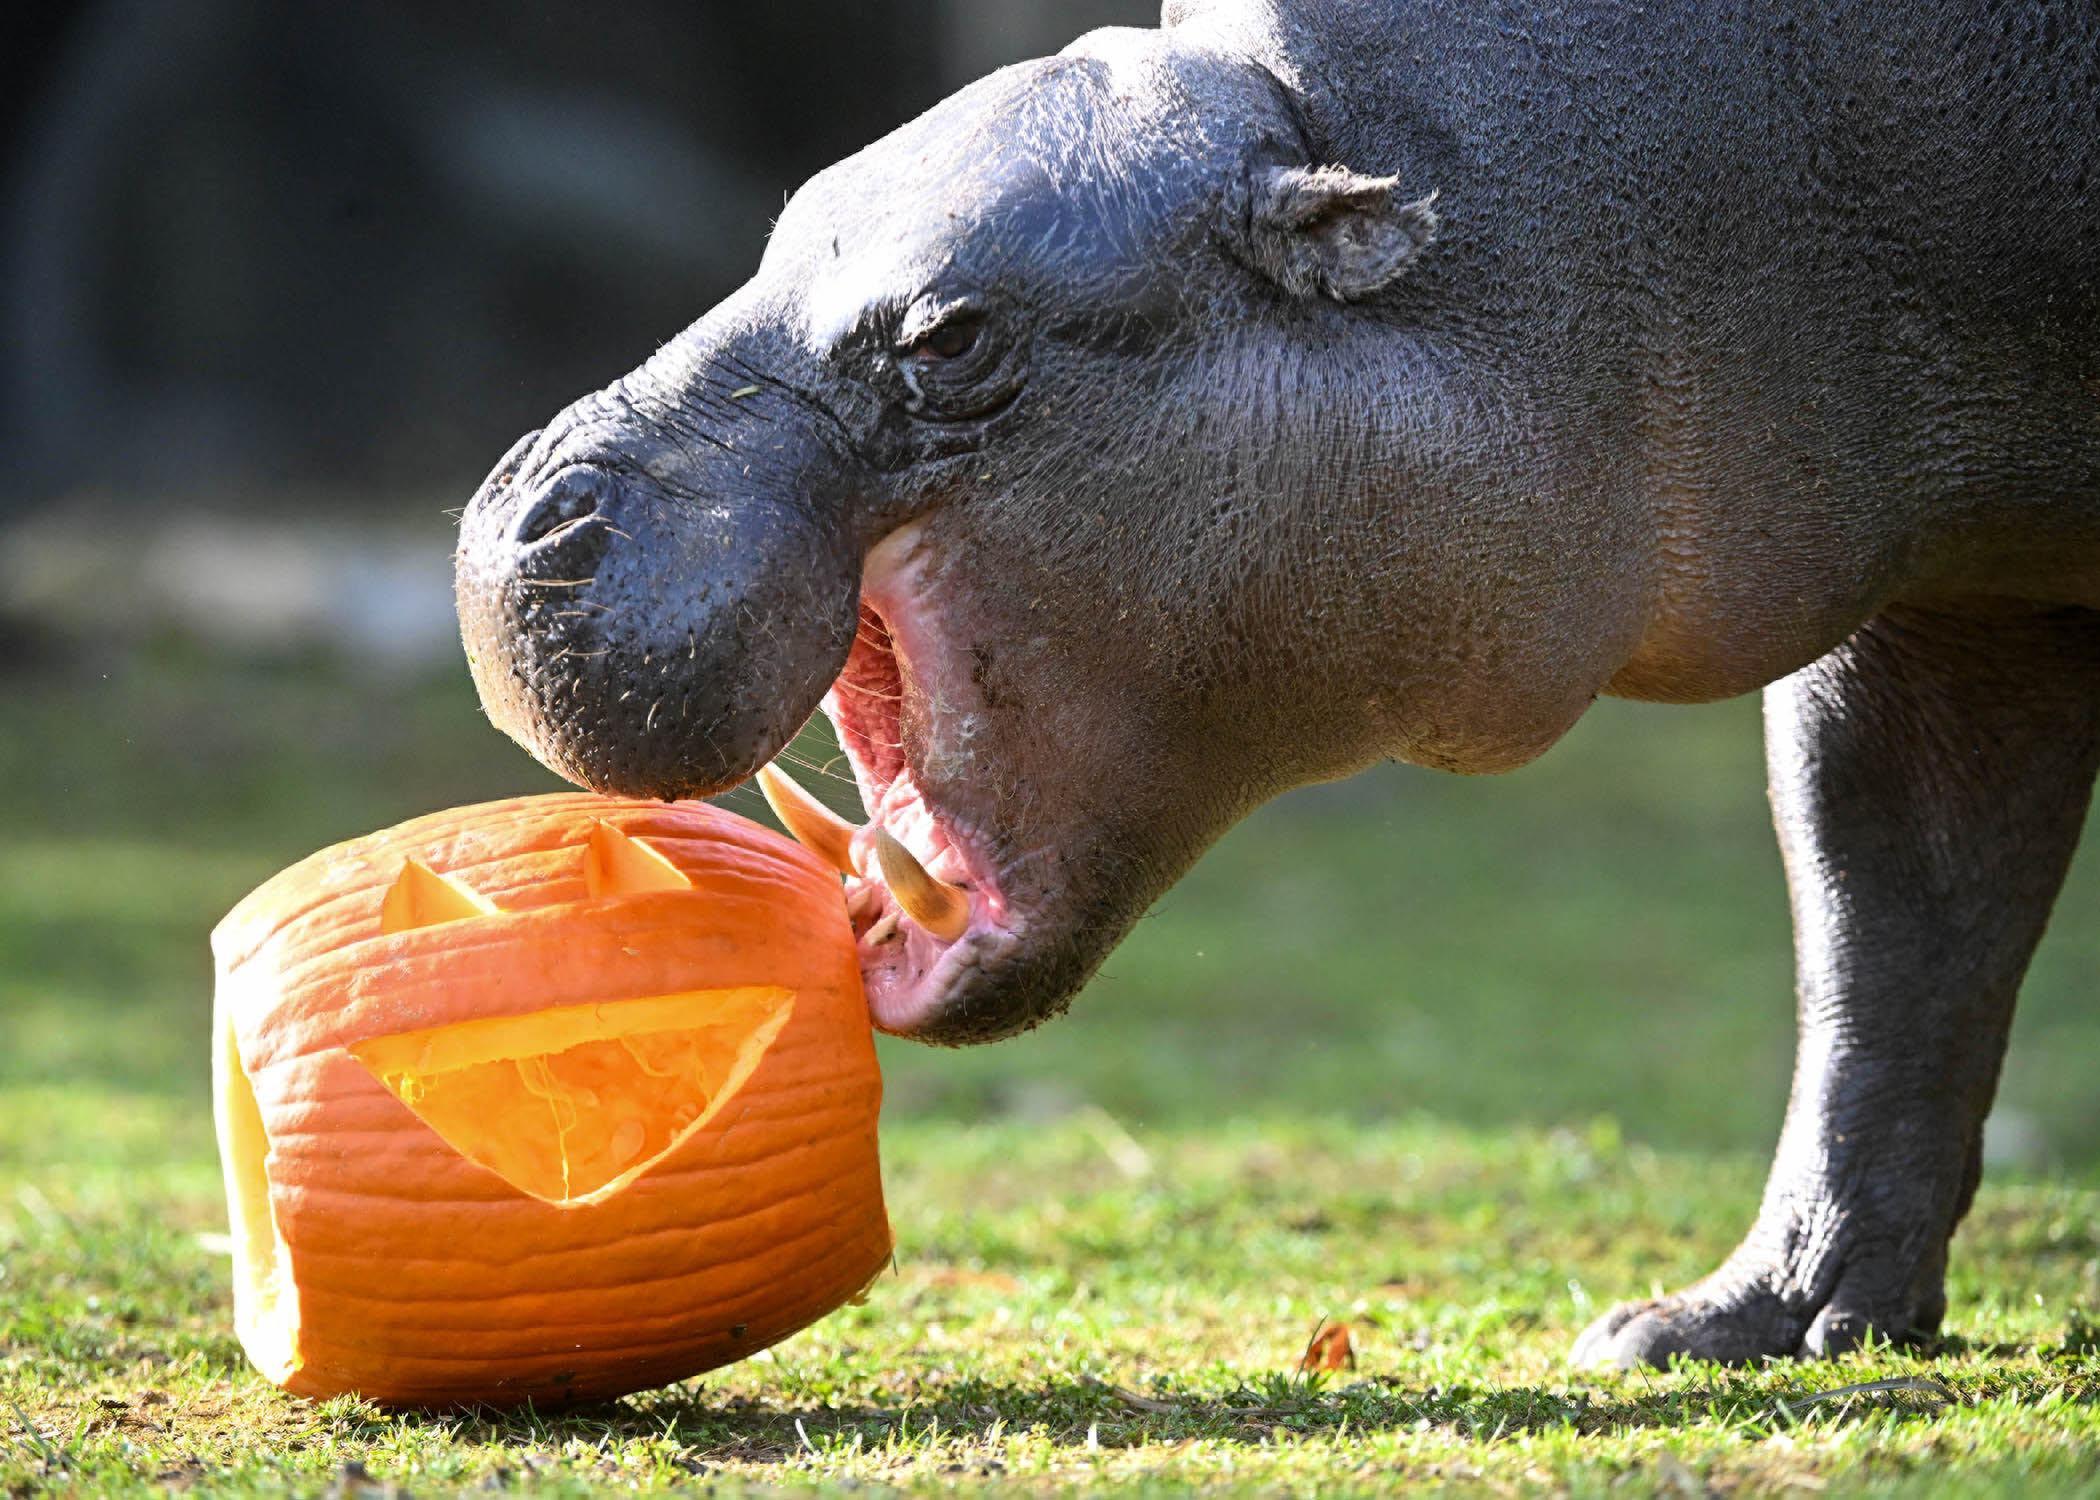 Banana, a 4-year-old pygmy hippopotamus at Brookfield Zoo, takes a bite out of her Halloween treat. (Jim Schulz / CZS-Brookfield Zoo)